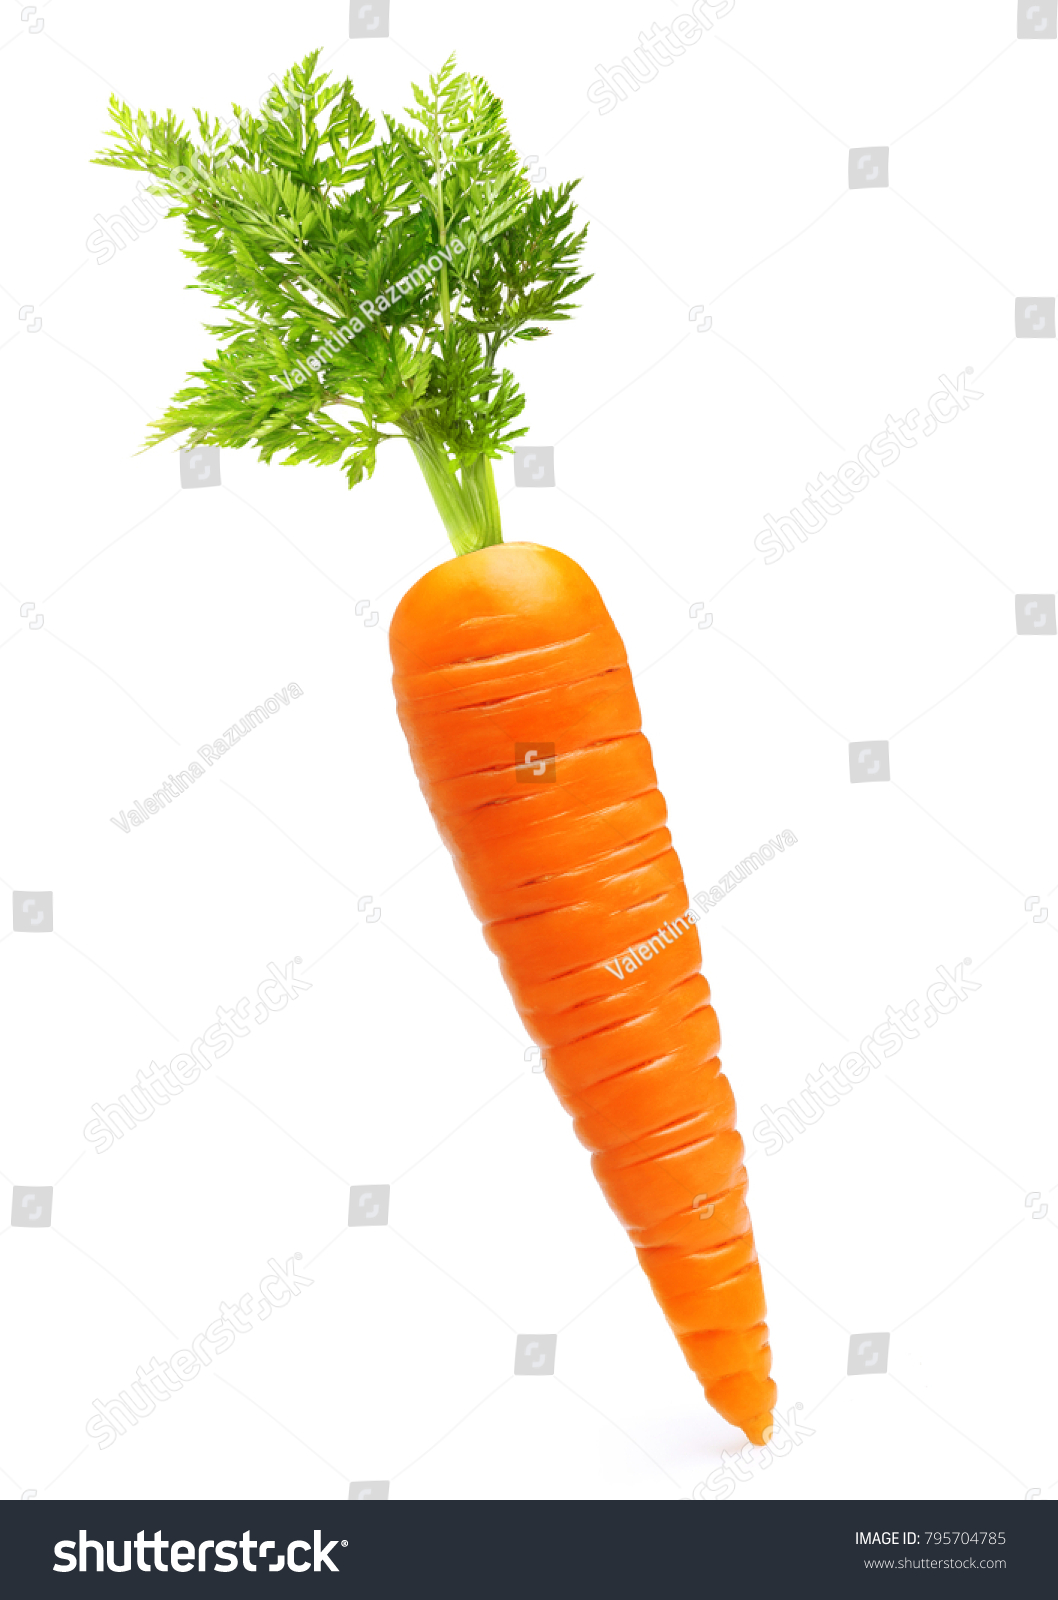 Carrot isolated on white background #795704785